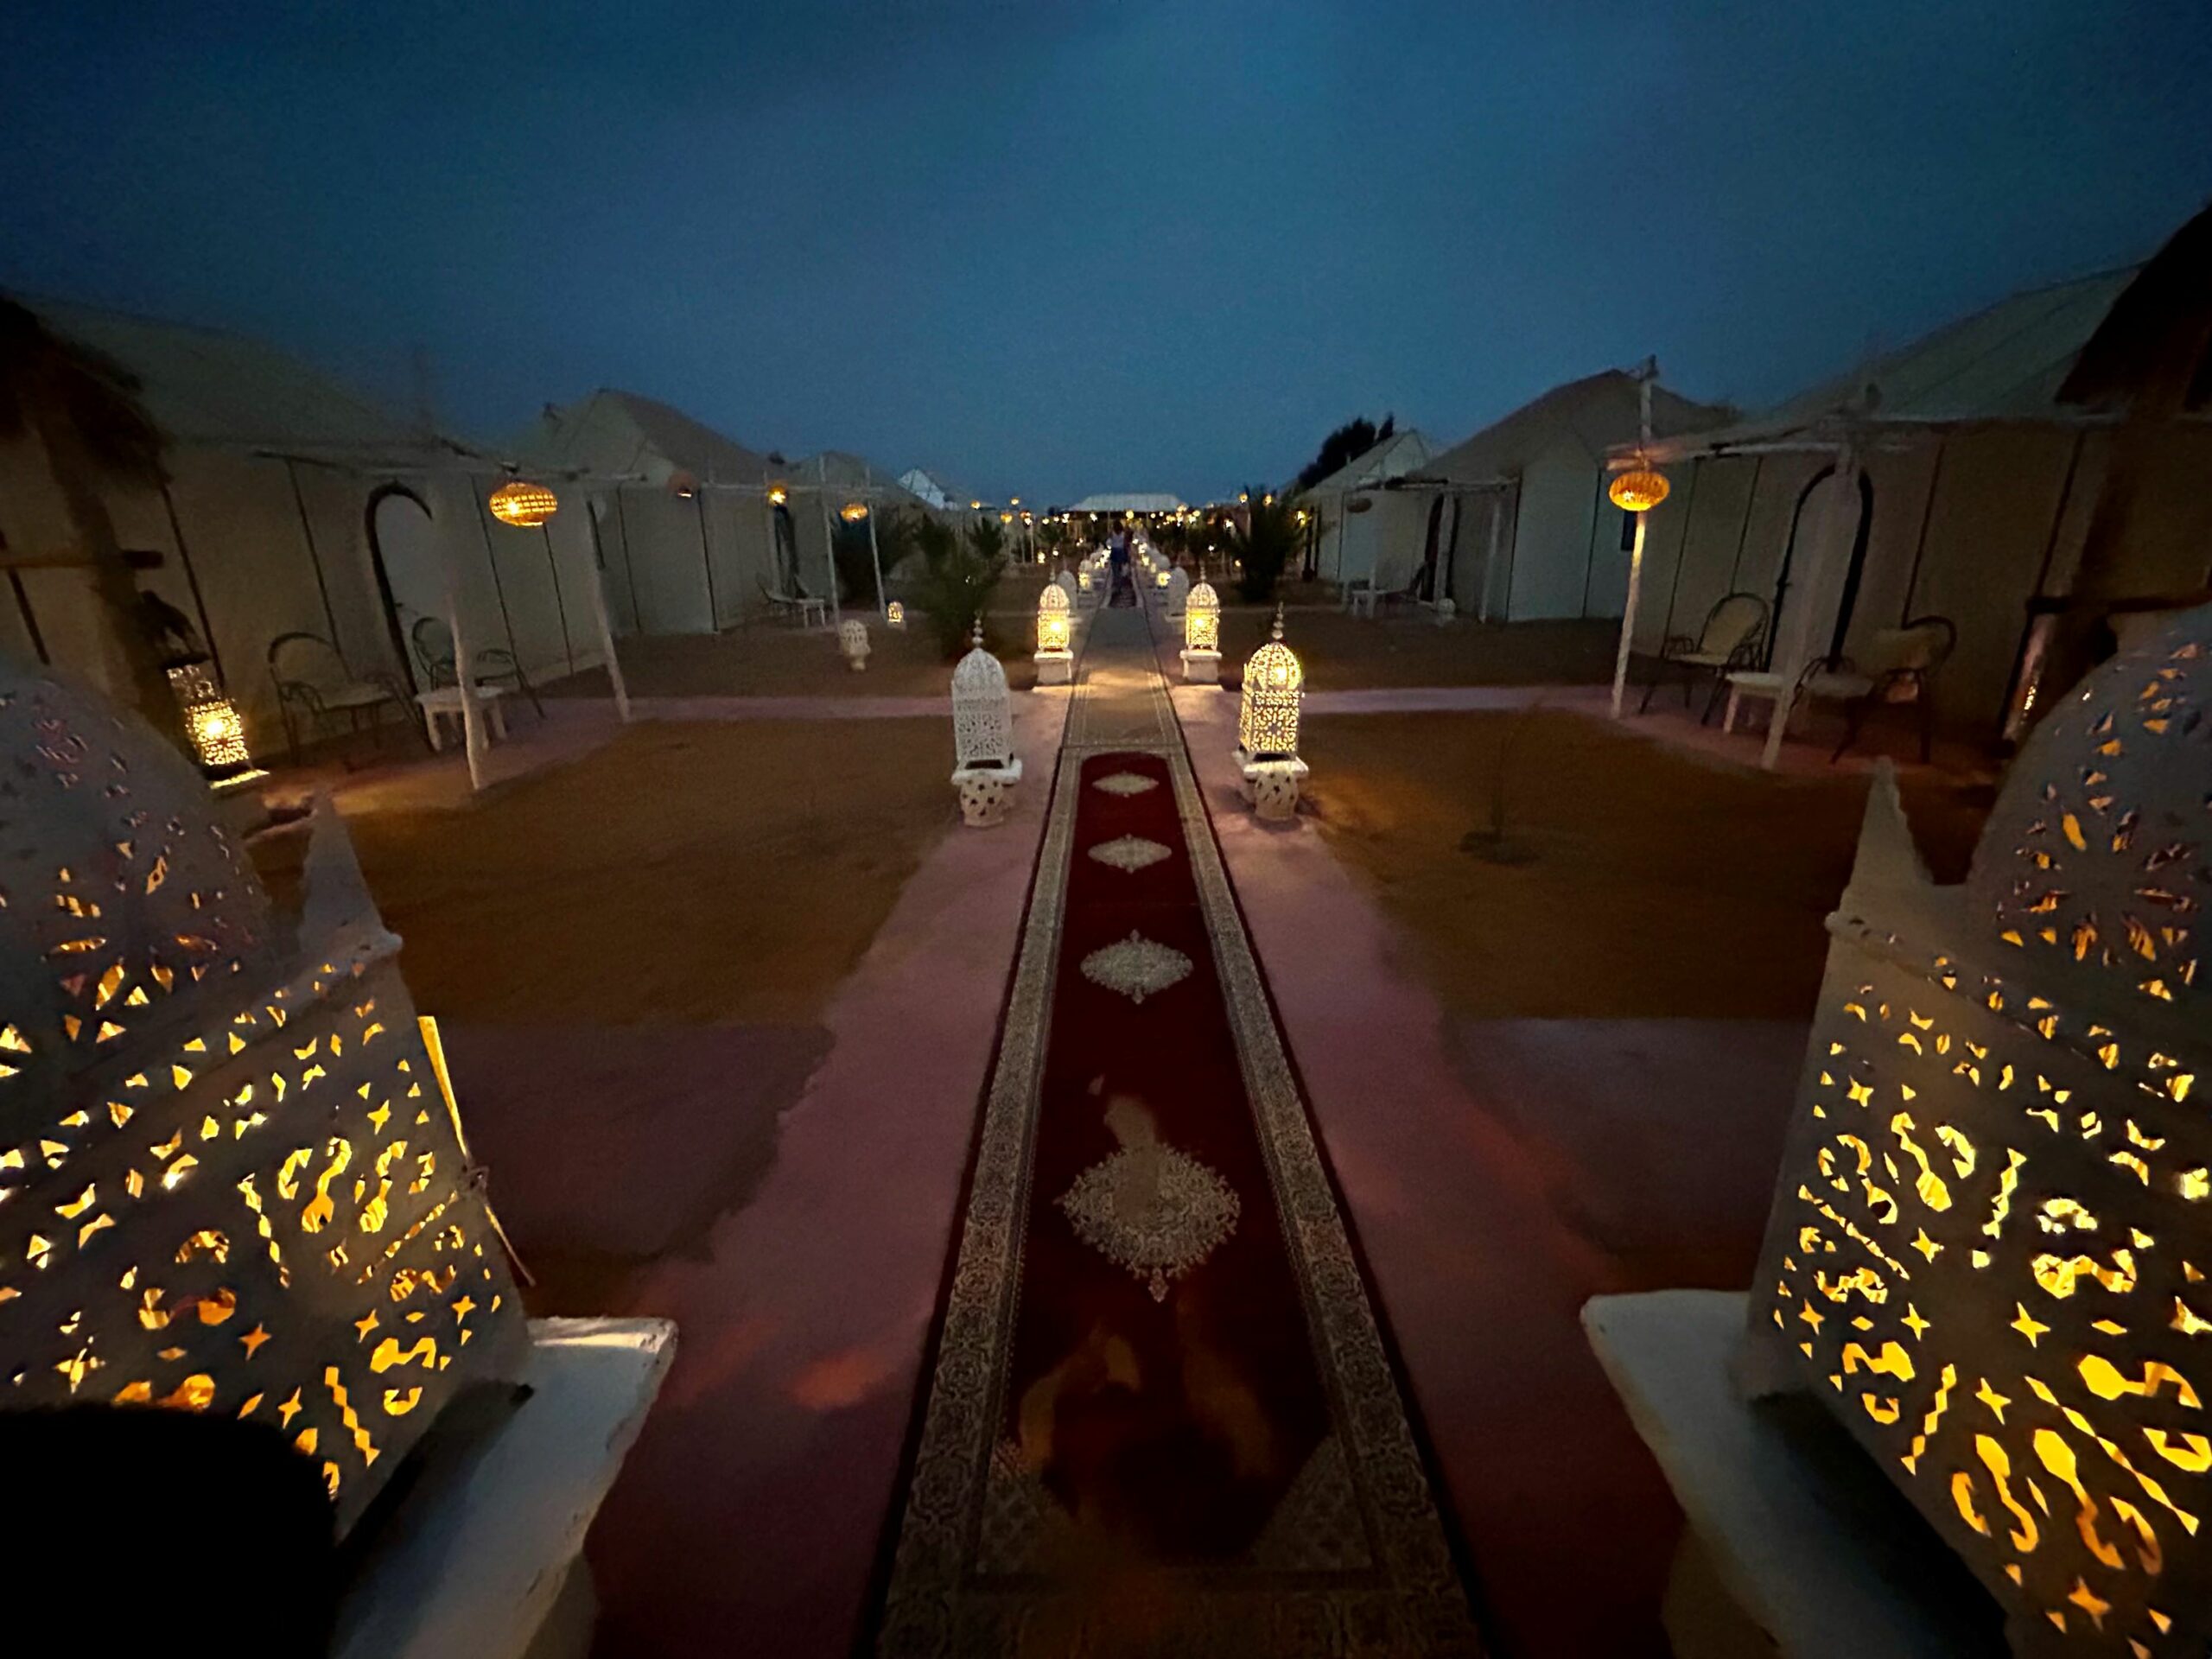 An image of our Merzouga glamping campsite that we arrived at from our camel ride.